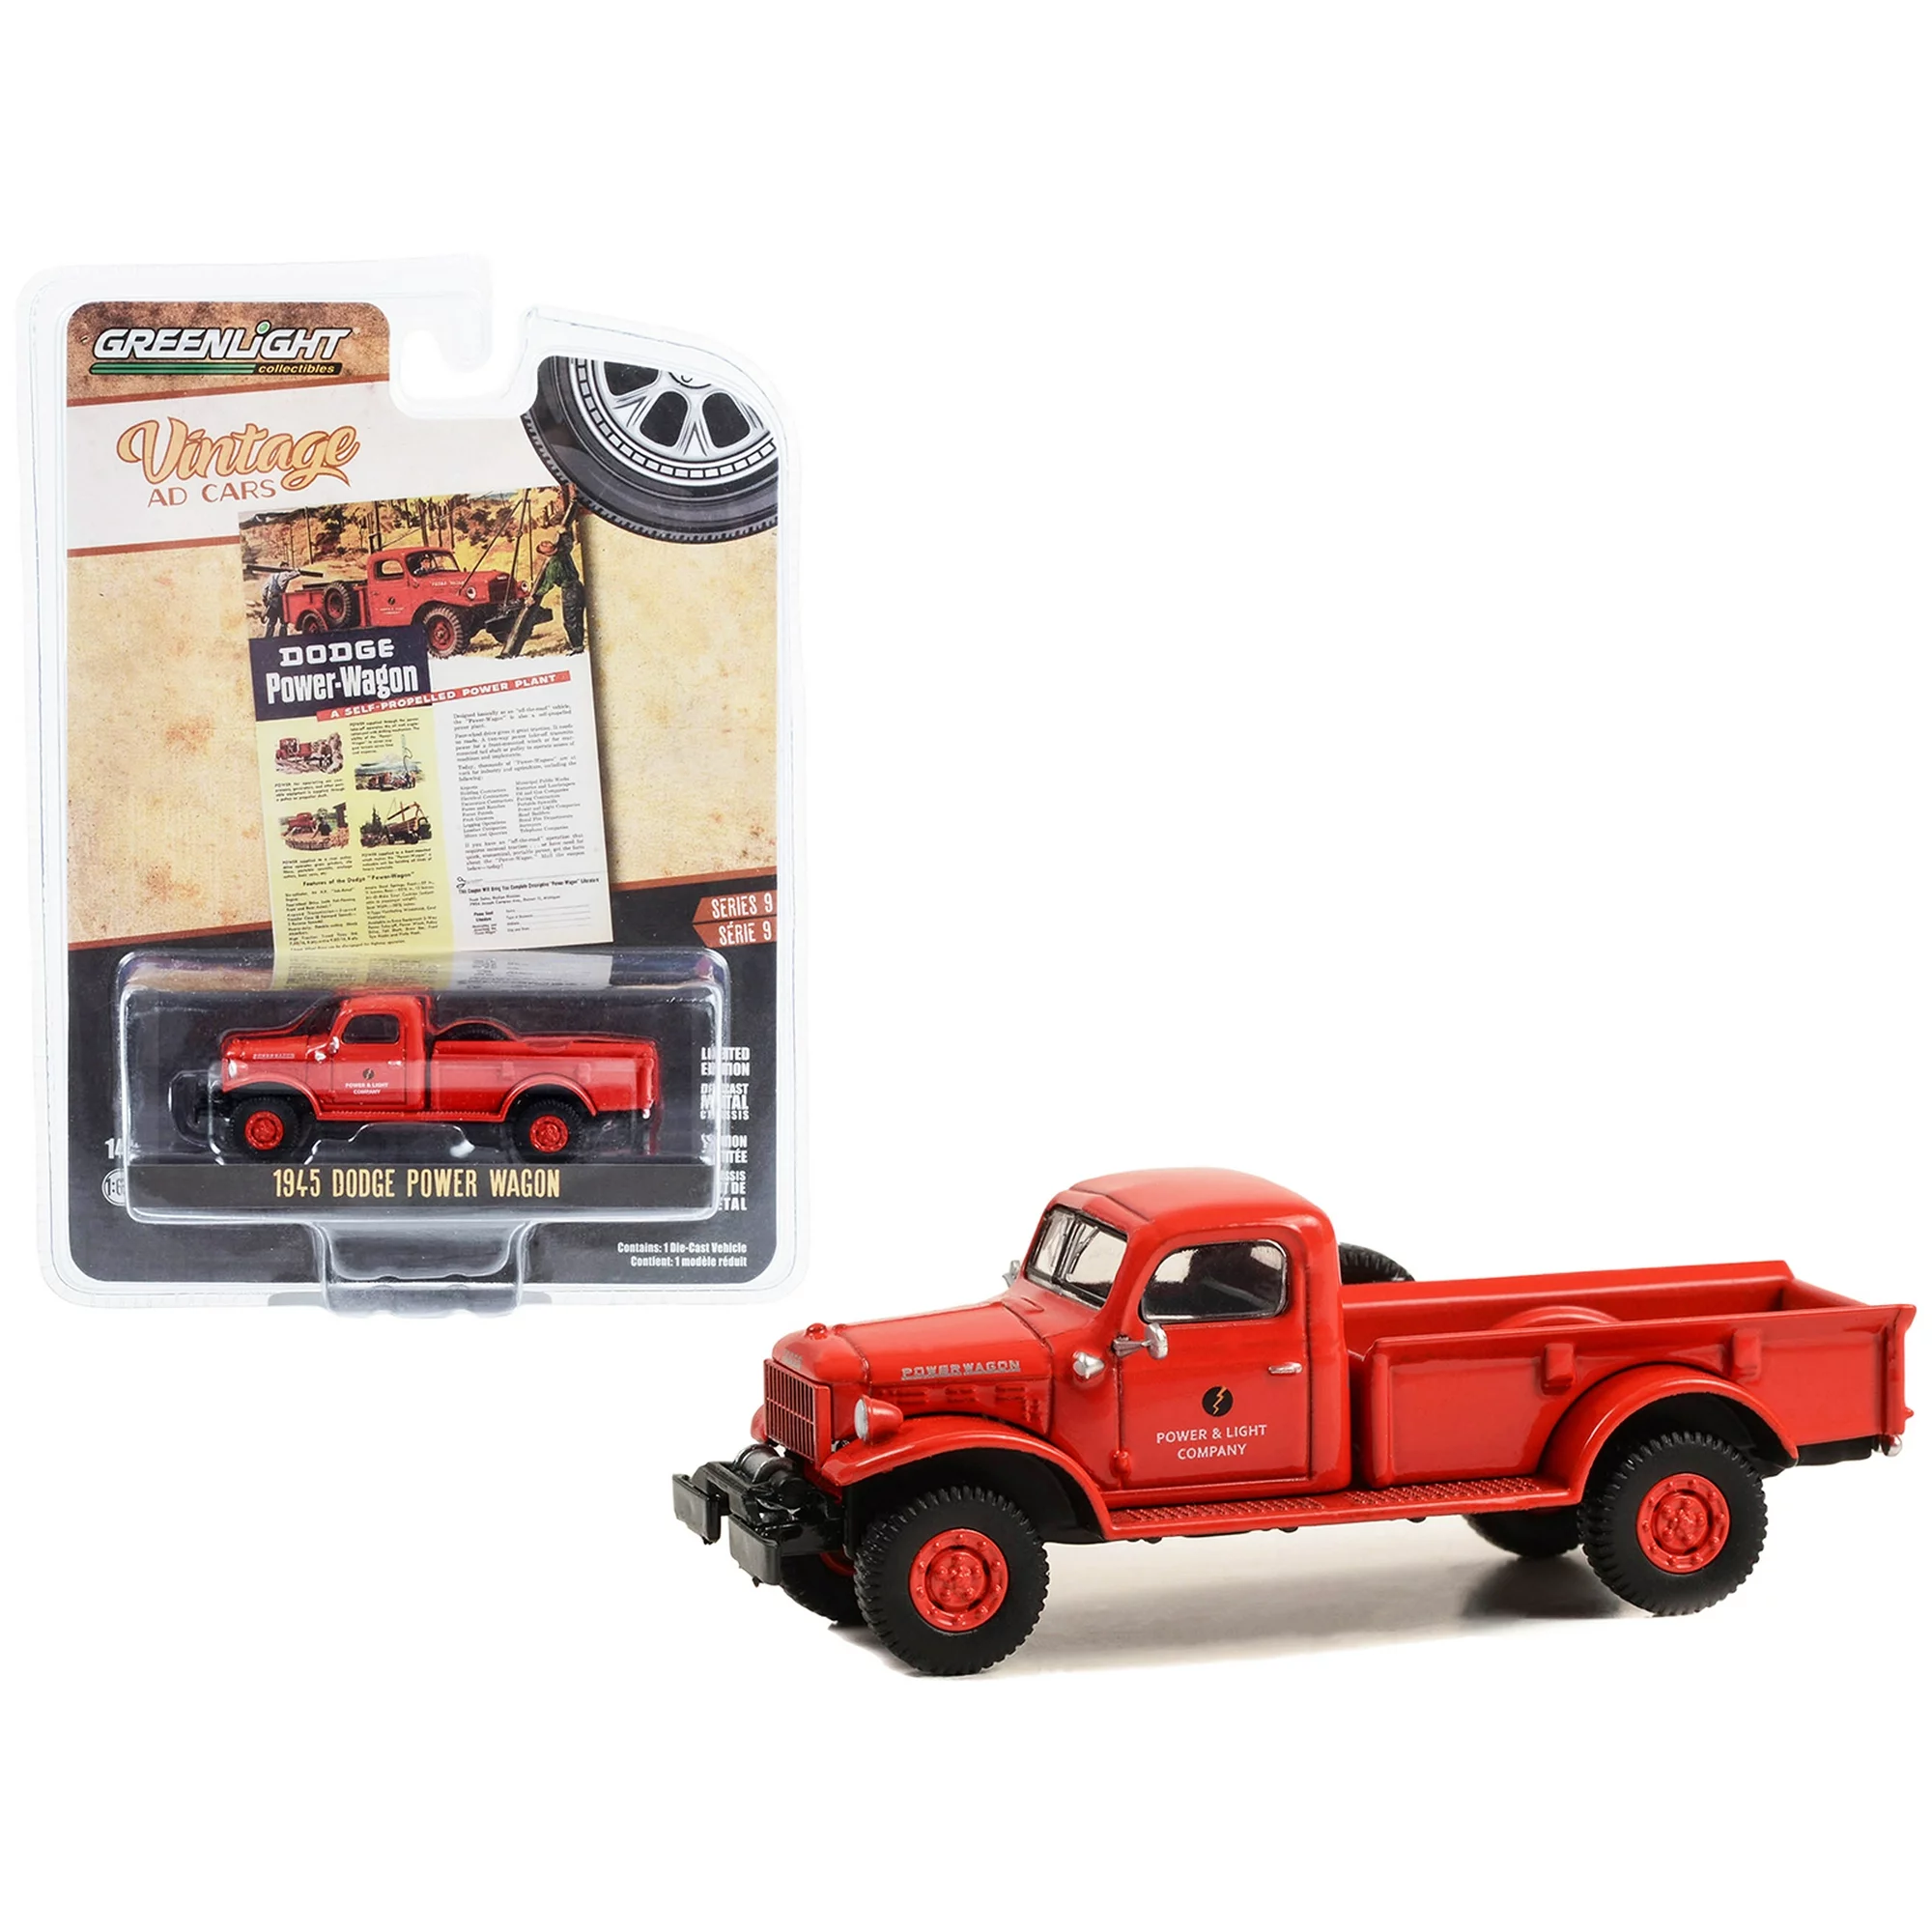 Greenlight 1/64 Vintage Ad Cars Series 9- 1945 Dodge Power Wagon Pickup Truck Red 39130-A